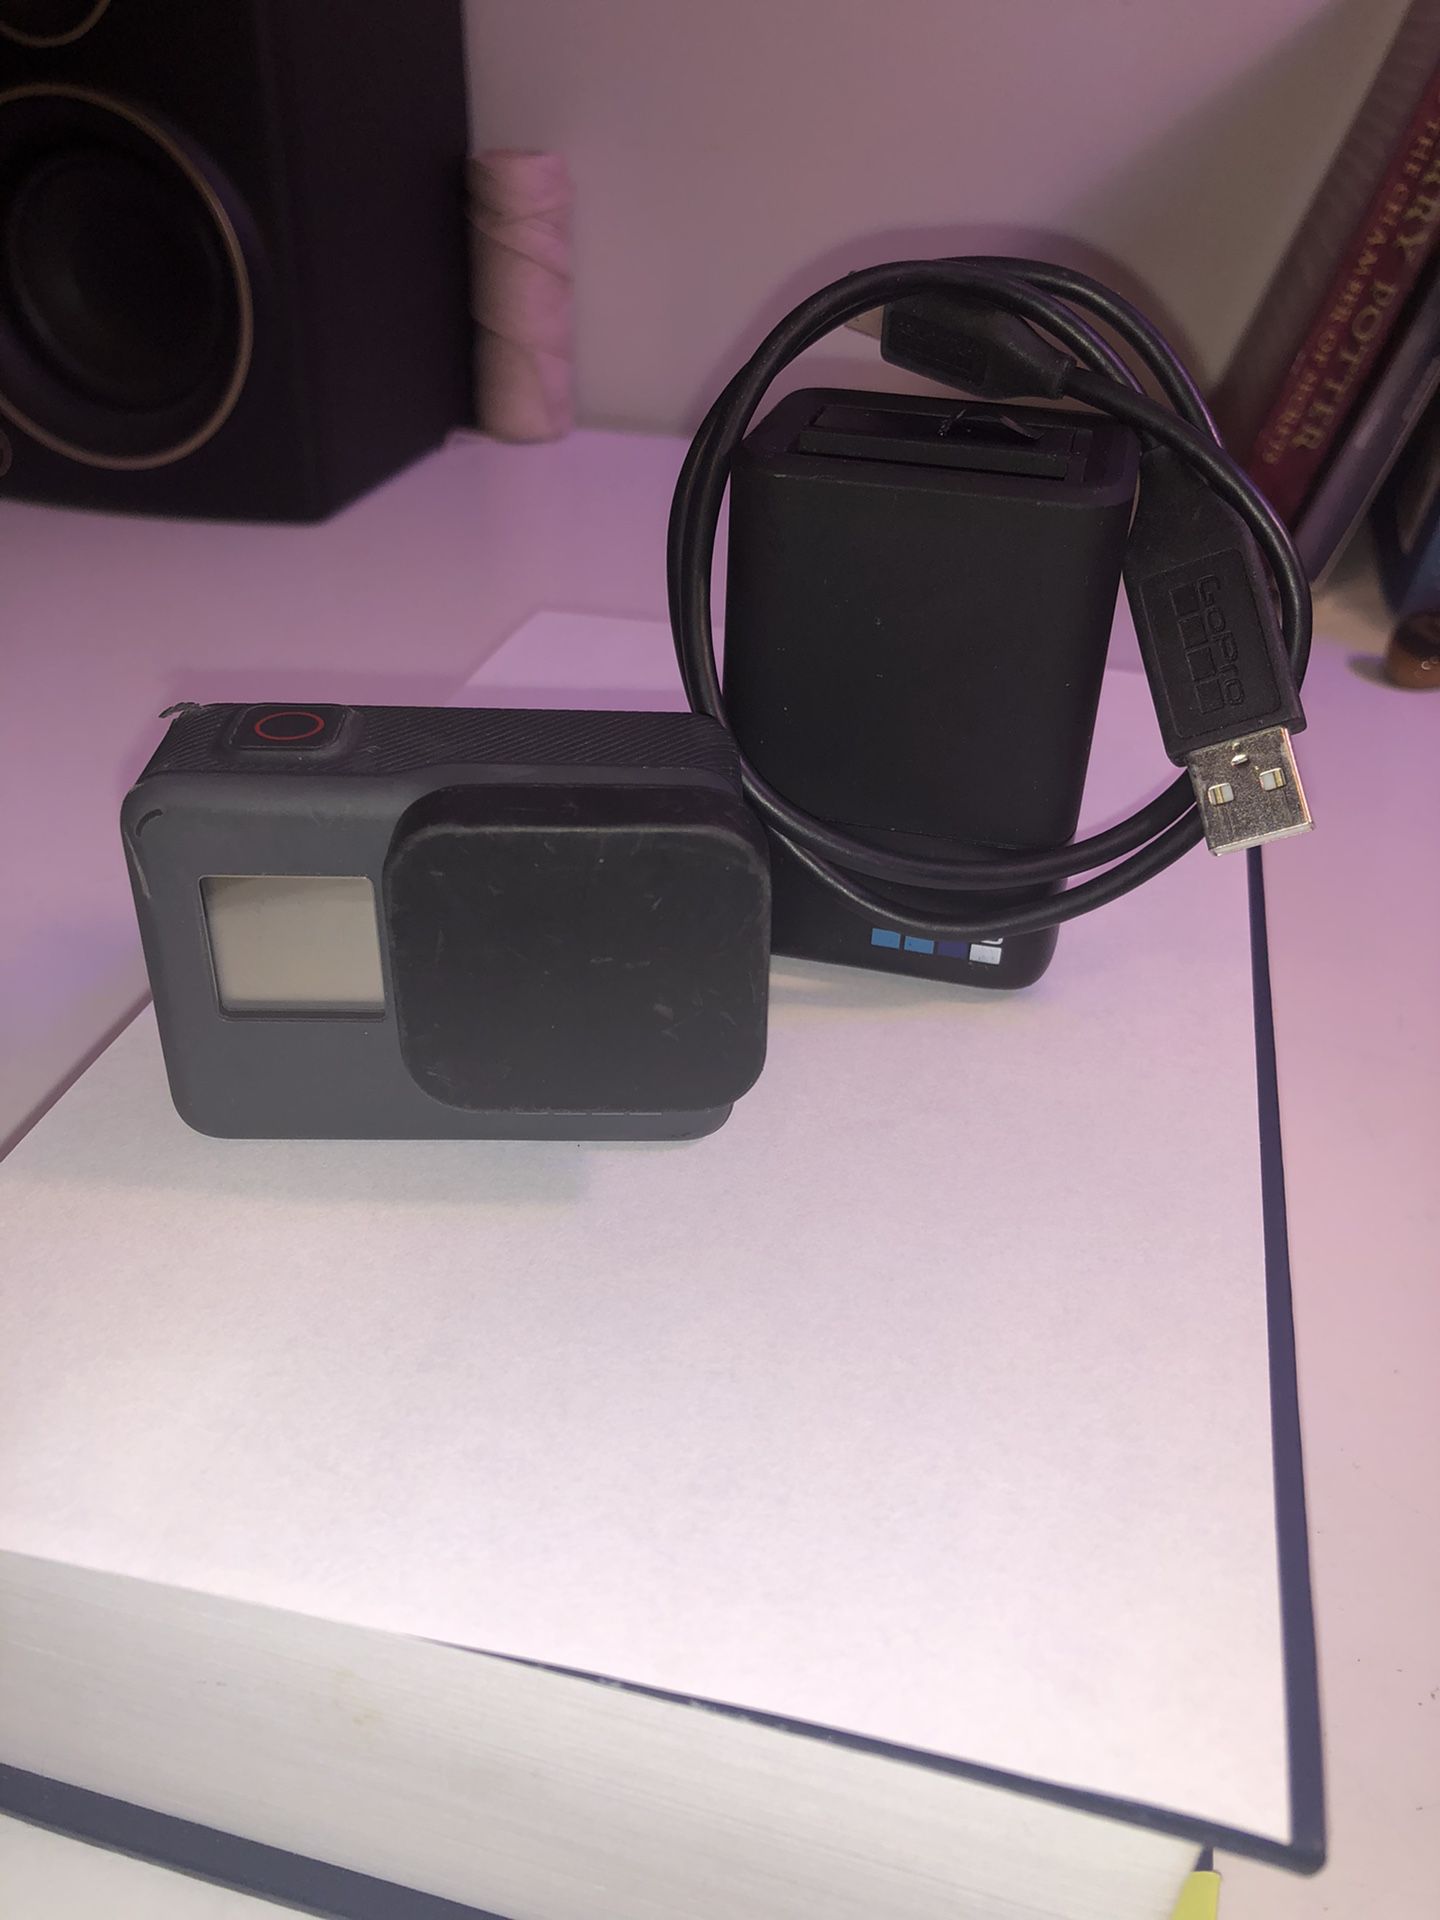 GoPro HERO6 4K Black - Pre-Owned, Good Condition